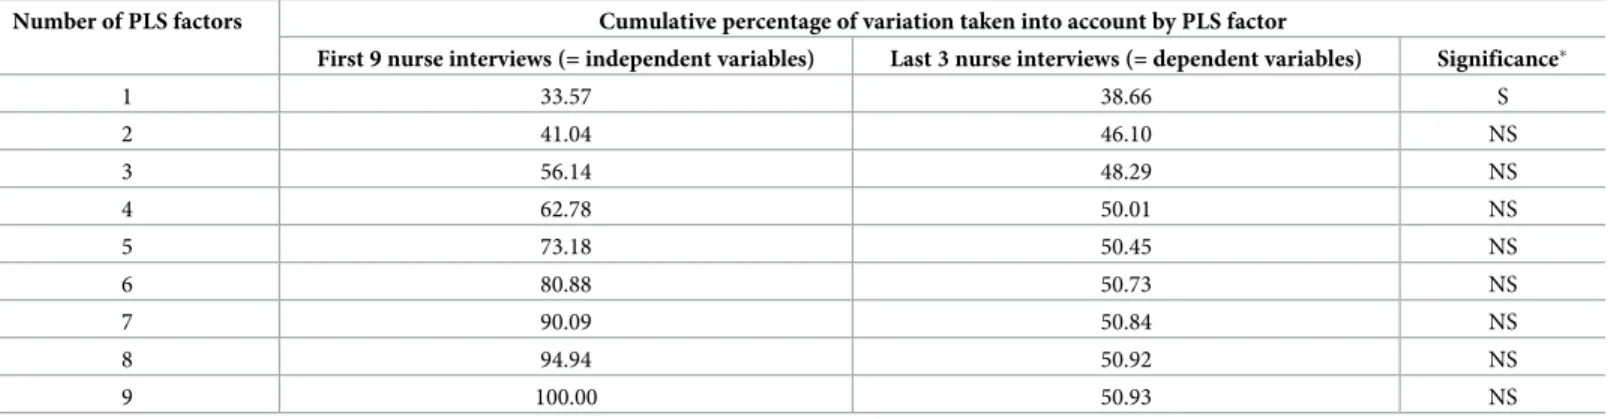 Table 1. Cumulative percentage of variation of the first nine nurse interviews and the last three nurse interviews taken into account by PLS factor (N = 67).